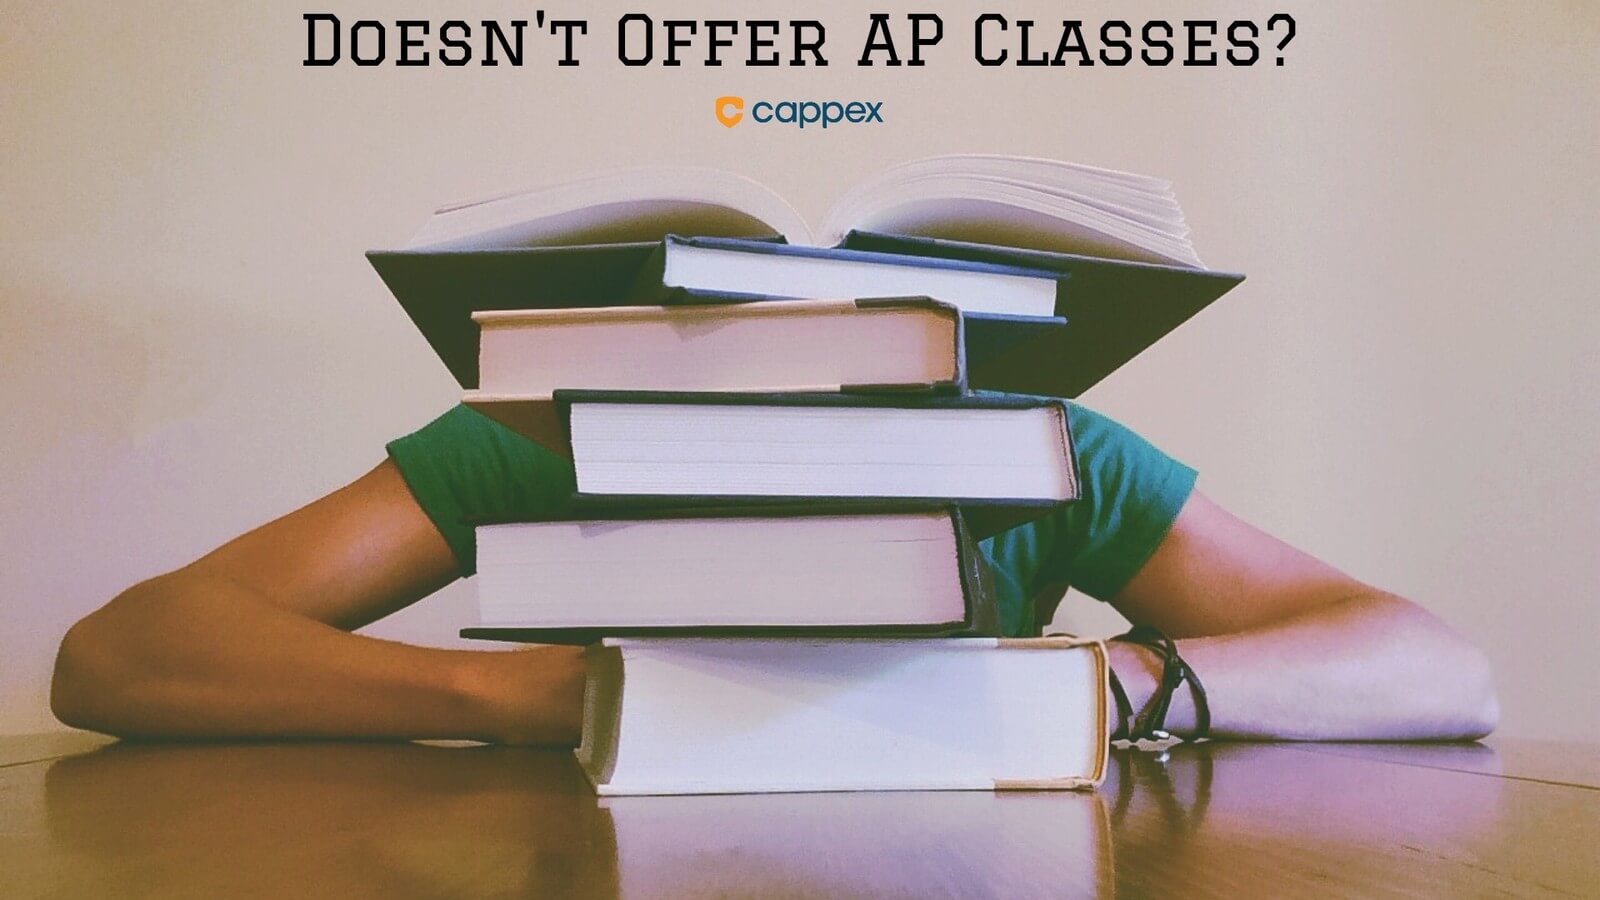 What if My High School Doesn't Offer AP Classes?